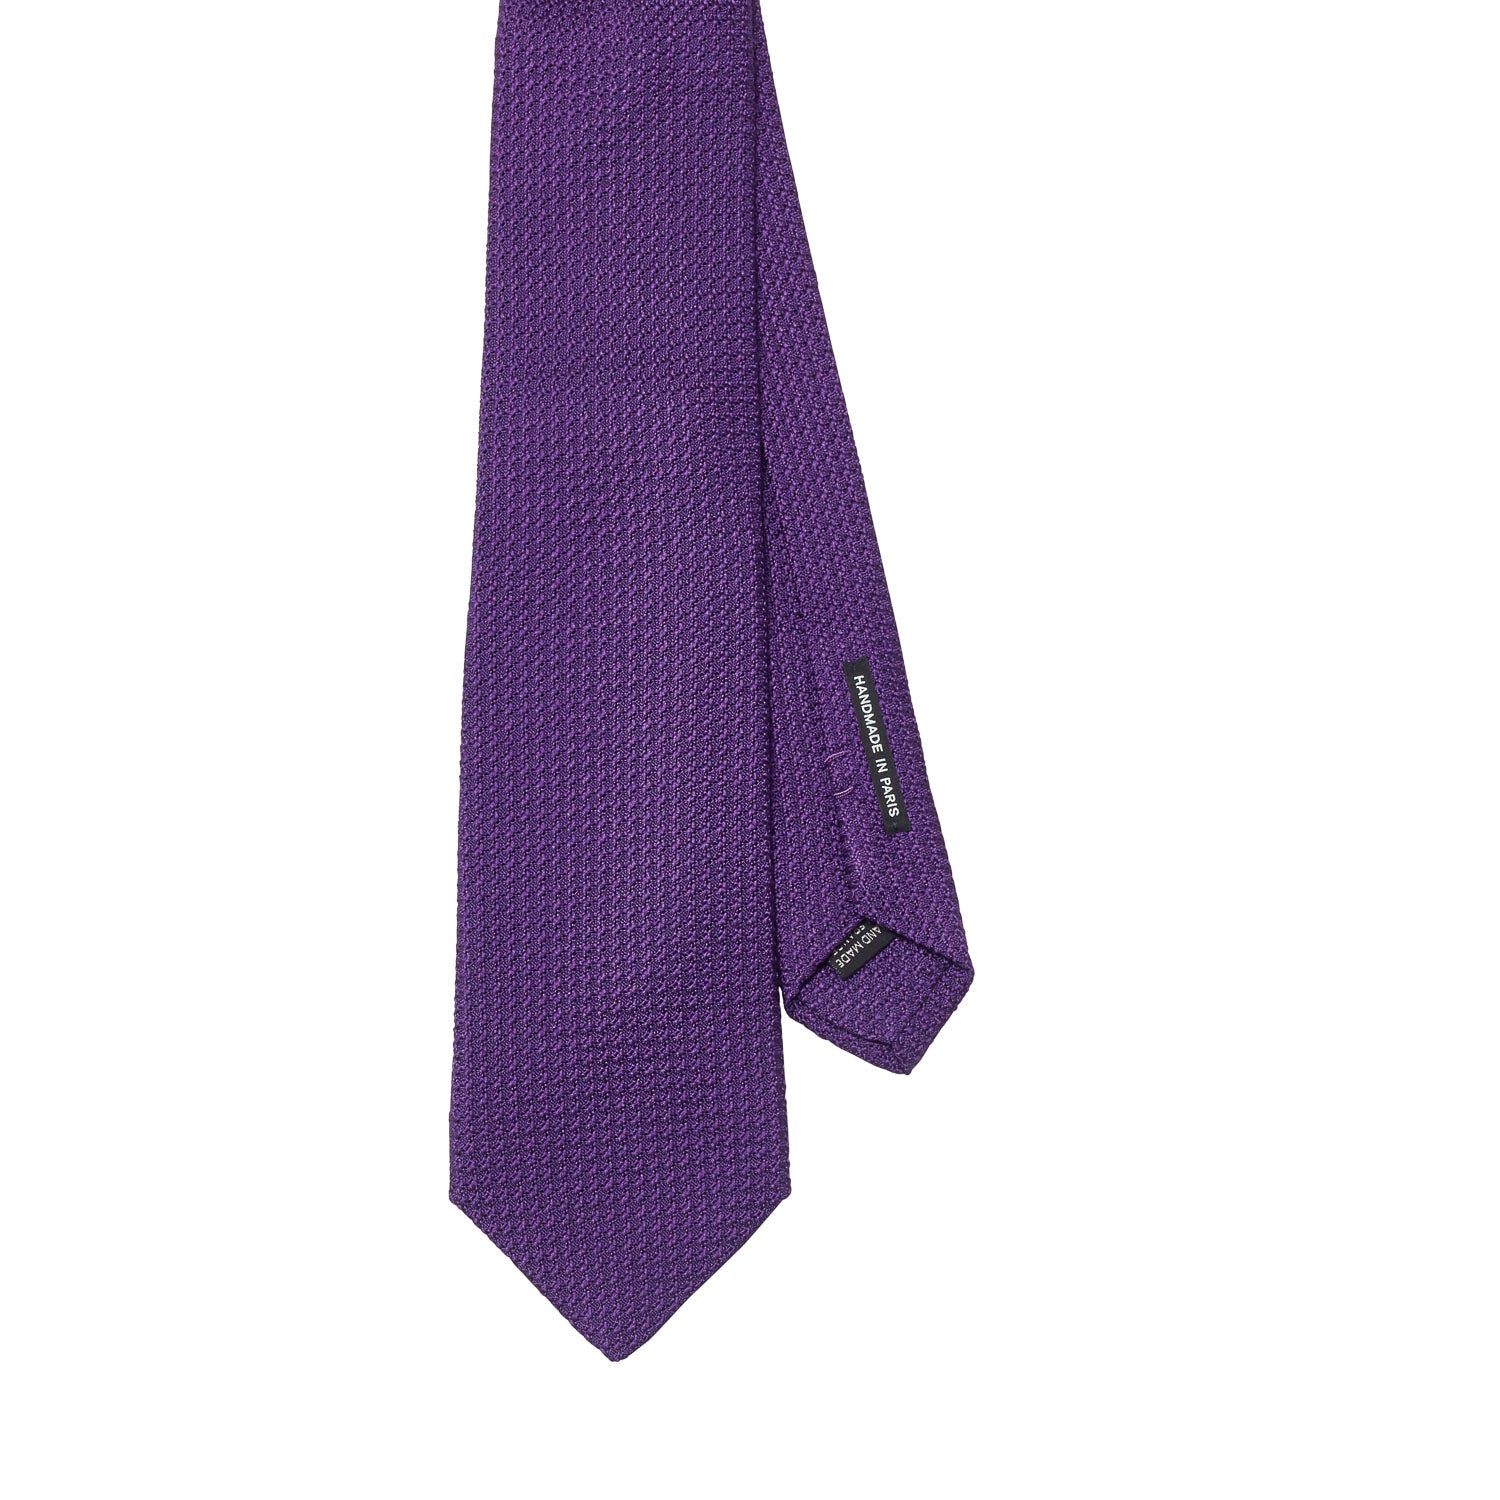 A Sovereign Grade Purple Grenadine Grossa tie made of English silk on a white background, sold by KirbyAllison.com.